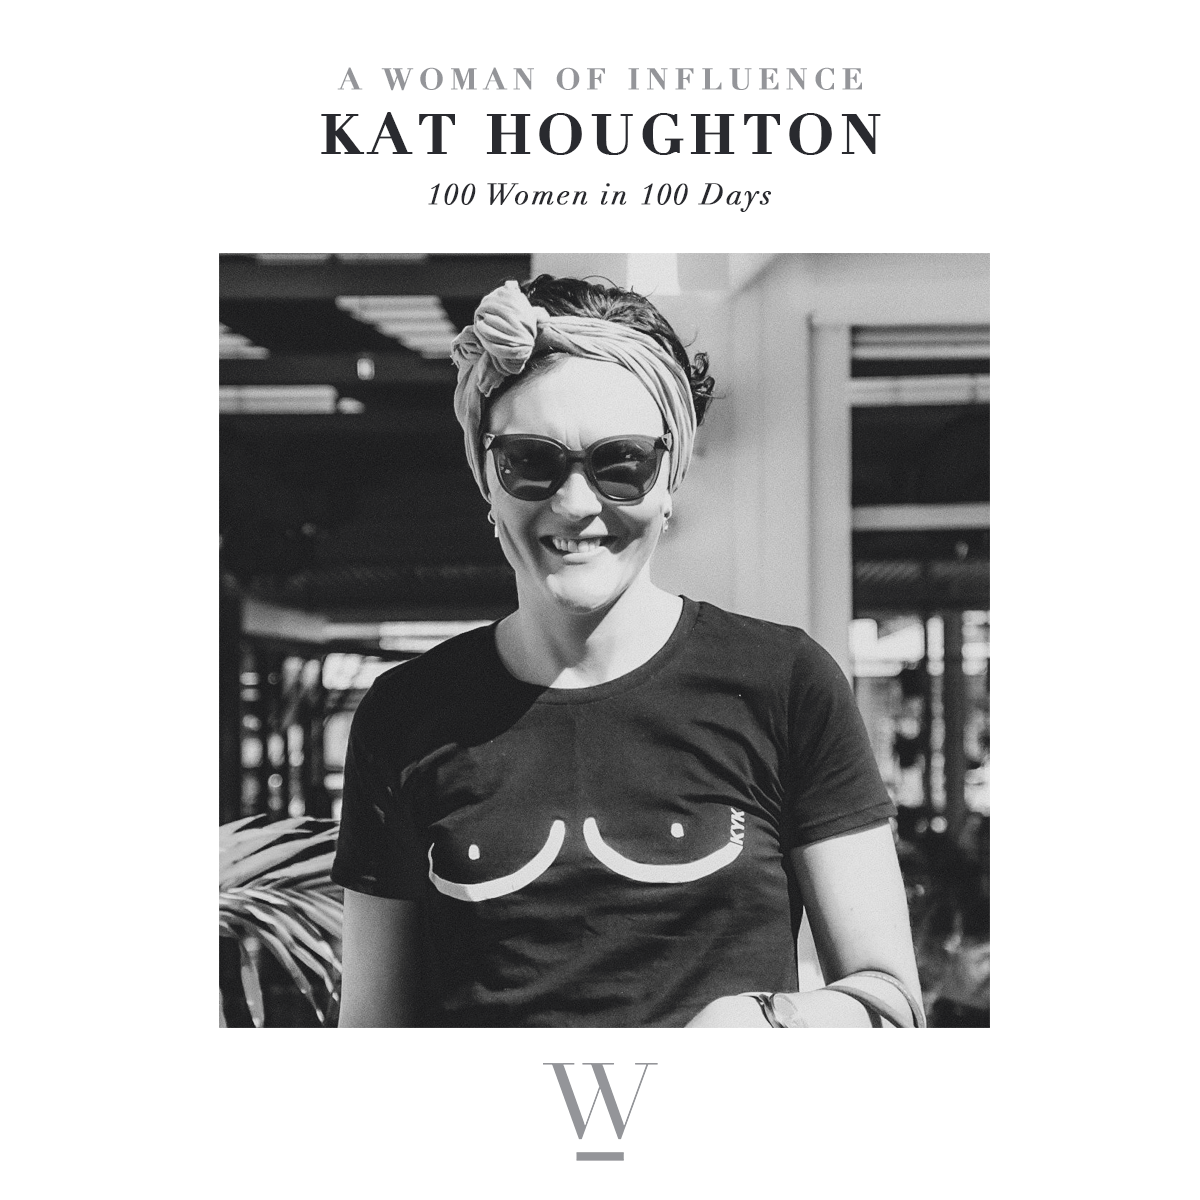 27/100: Kat Houghton - If you can't have boobs, draw them on